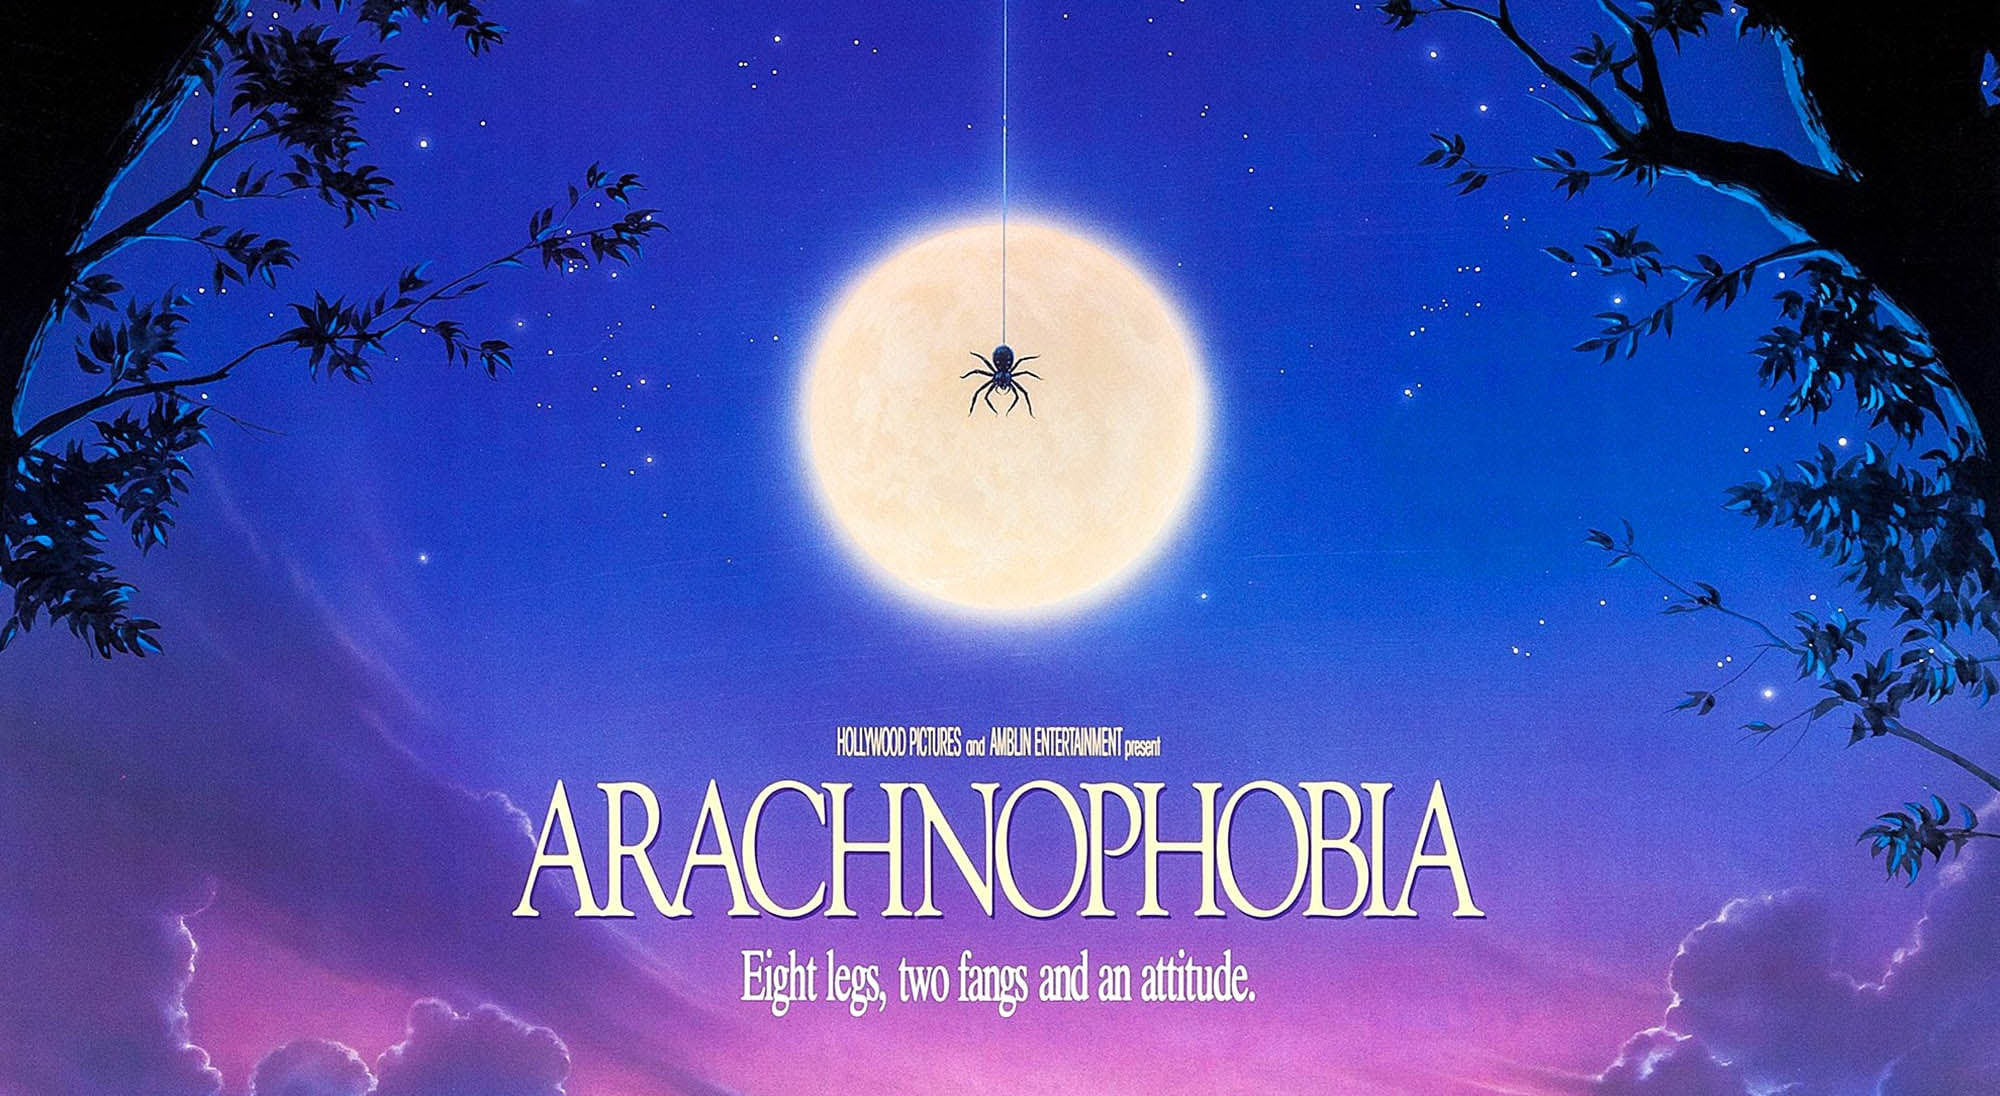 A remake of beloved 90s horror-comedy 'Arachnophobia' is on the way. Here's why 'Arachnophobia' is still a kitsch horror gem that can’t be improved upon.